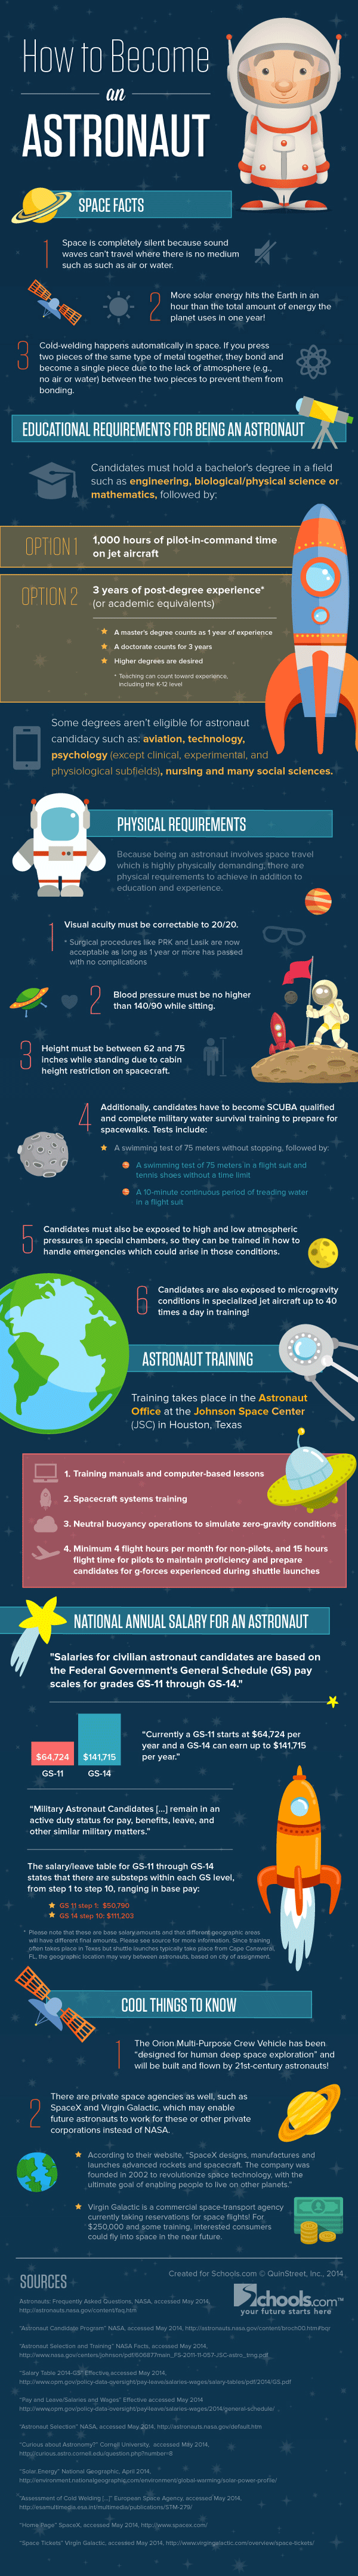 How to Train to Be an Astronaut - Infographic